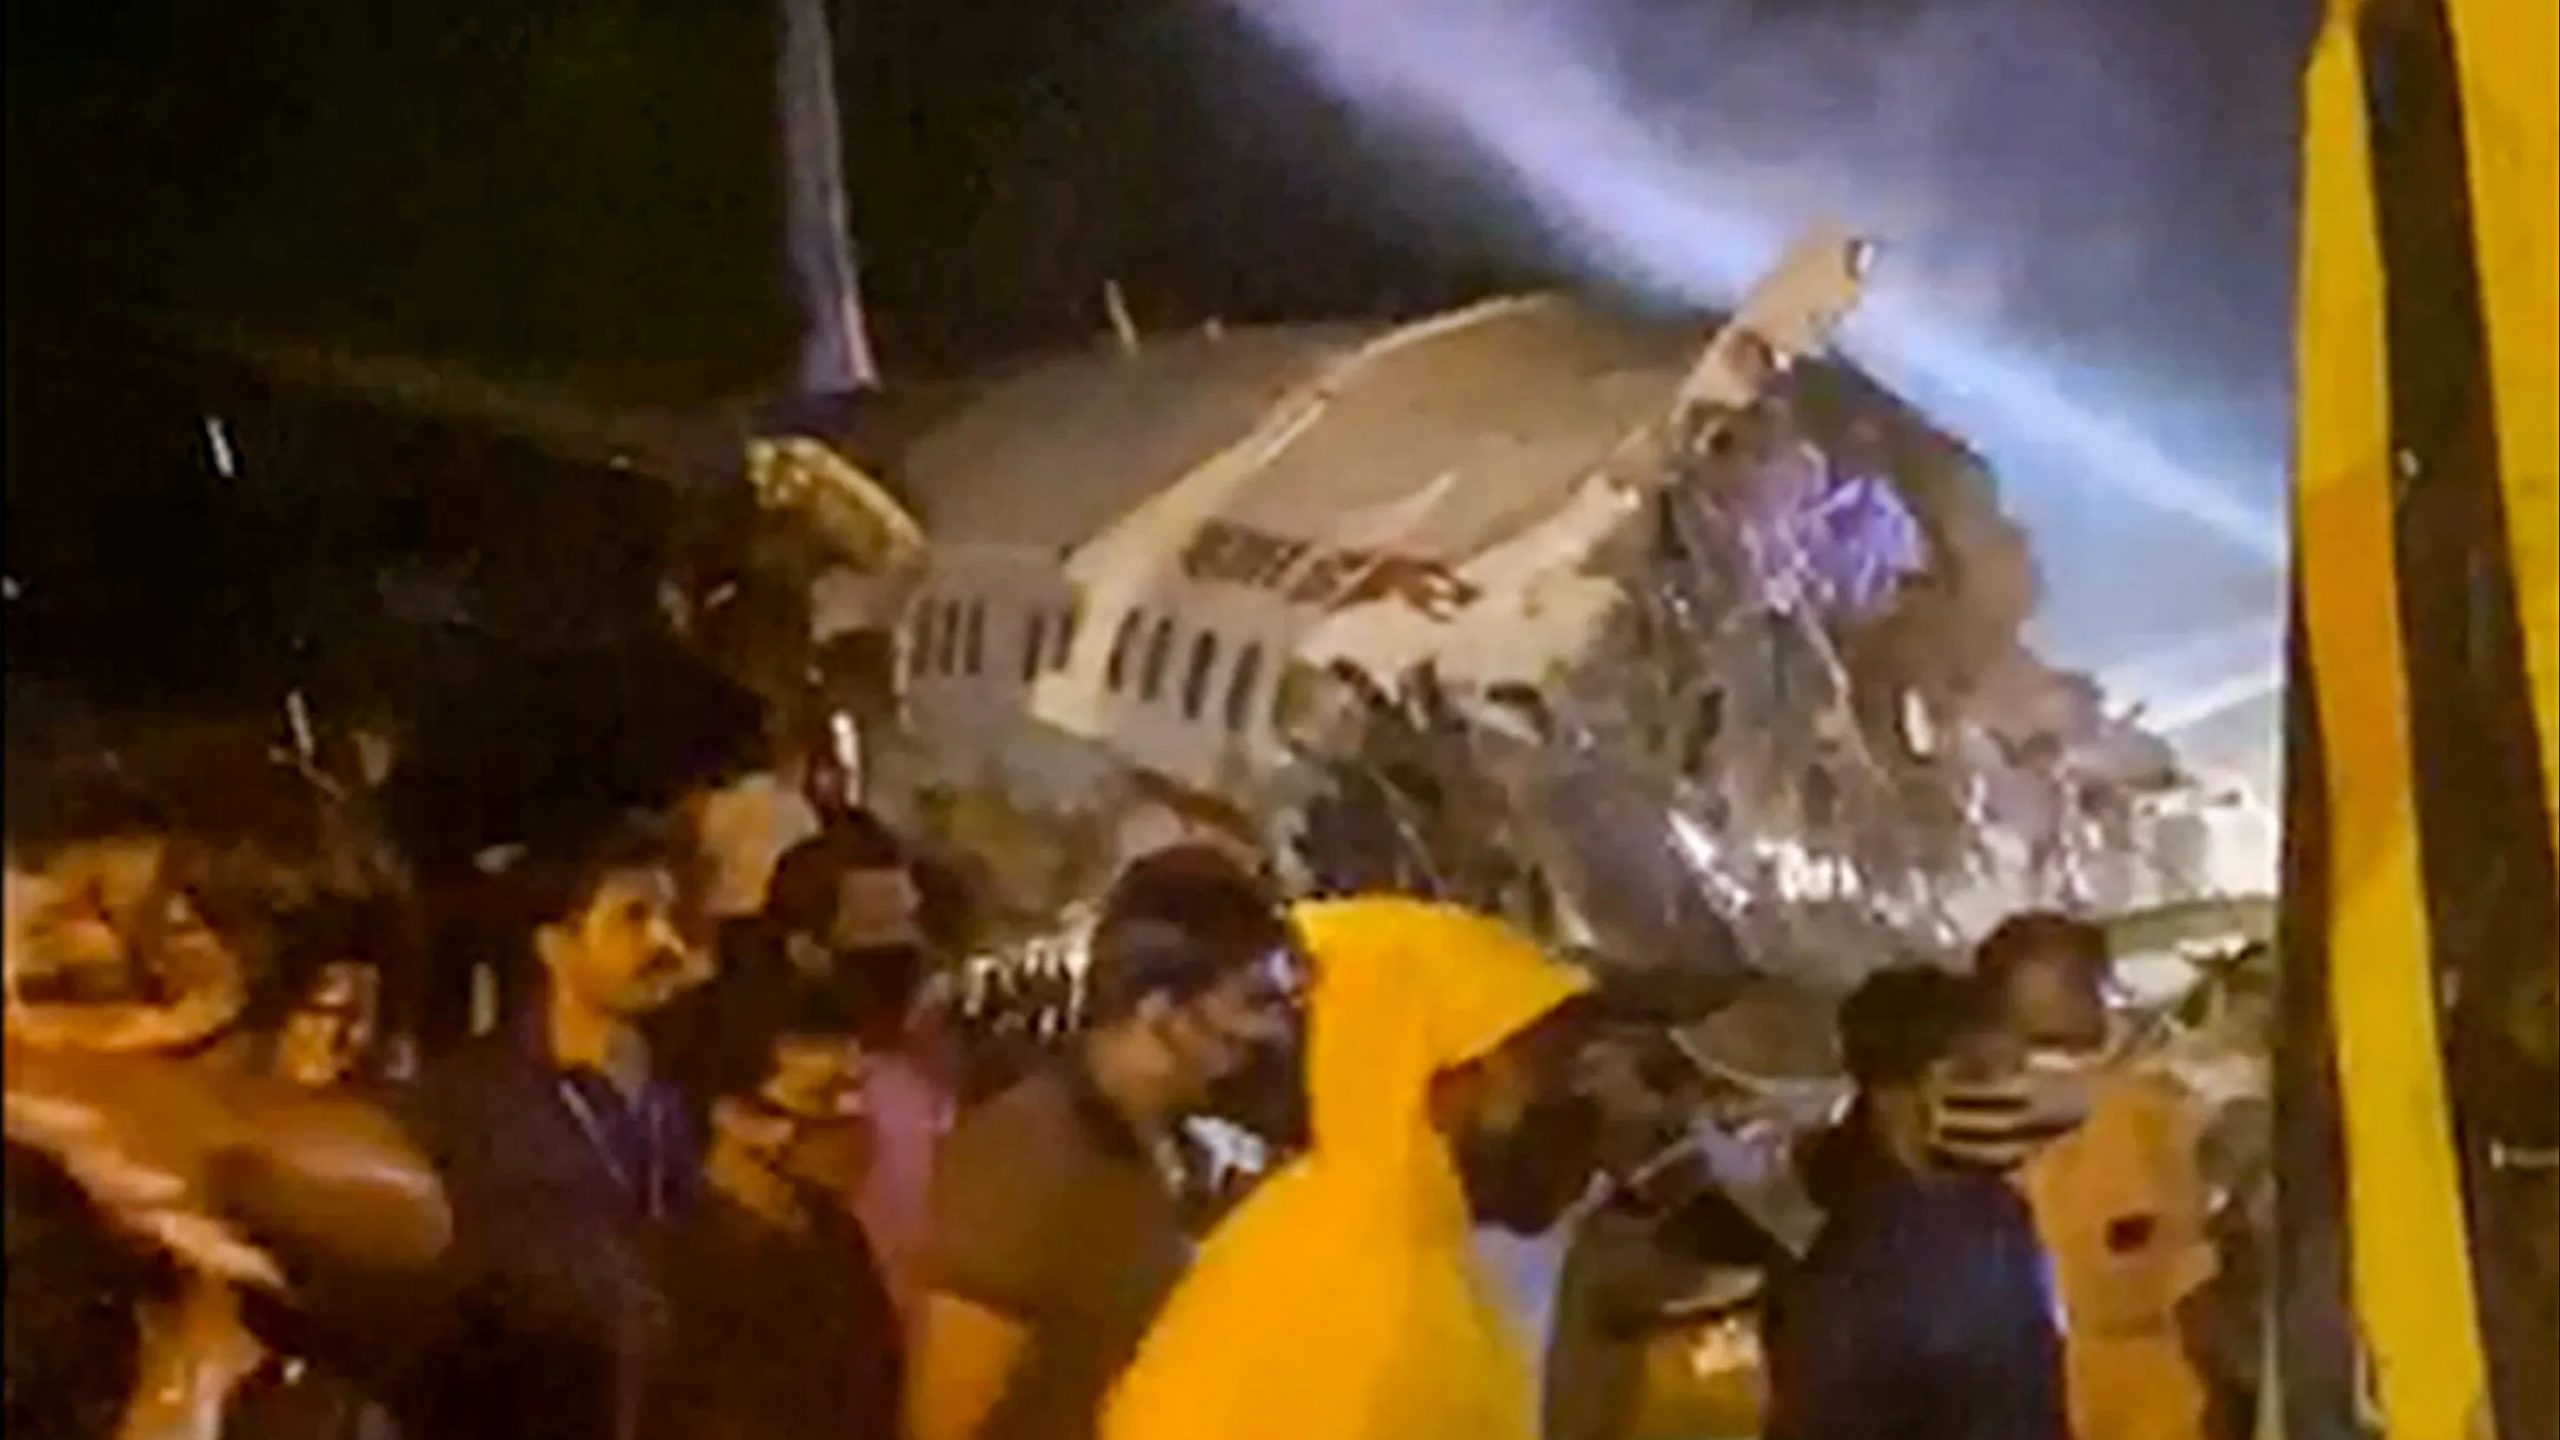 Kozhikode crash: Child separated from family, police trying to locate kin, say reports